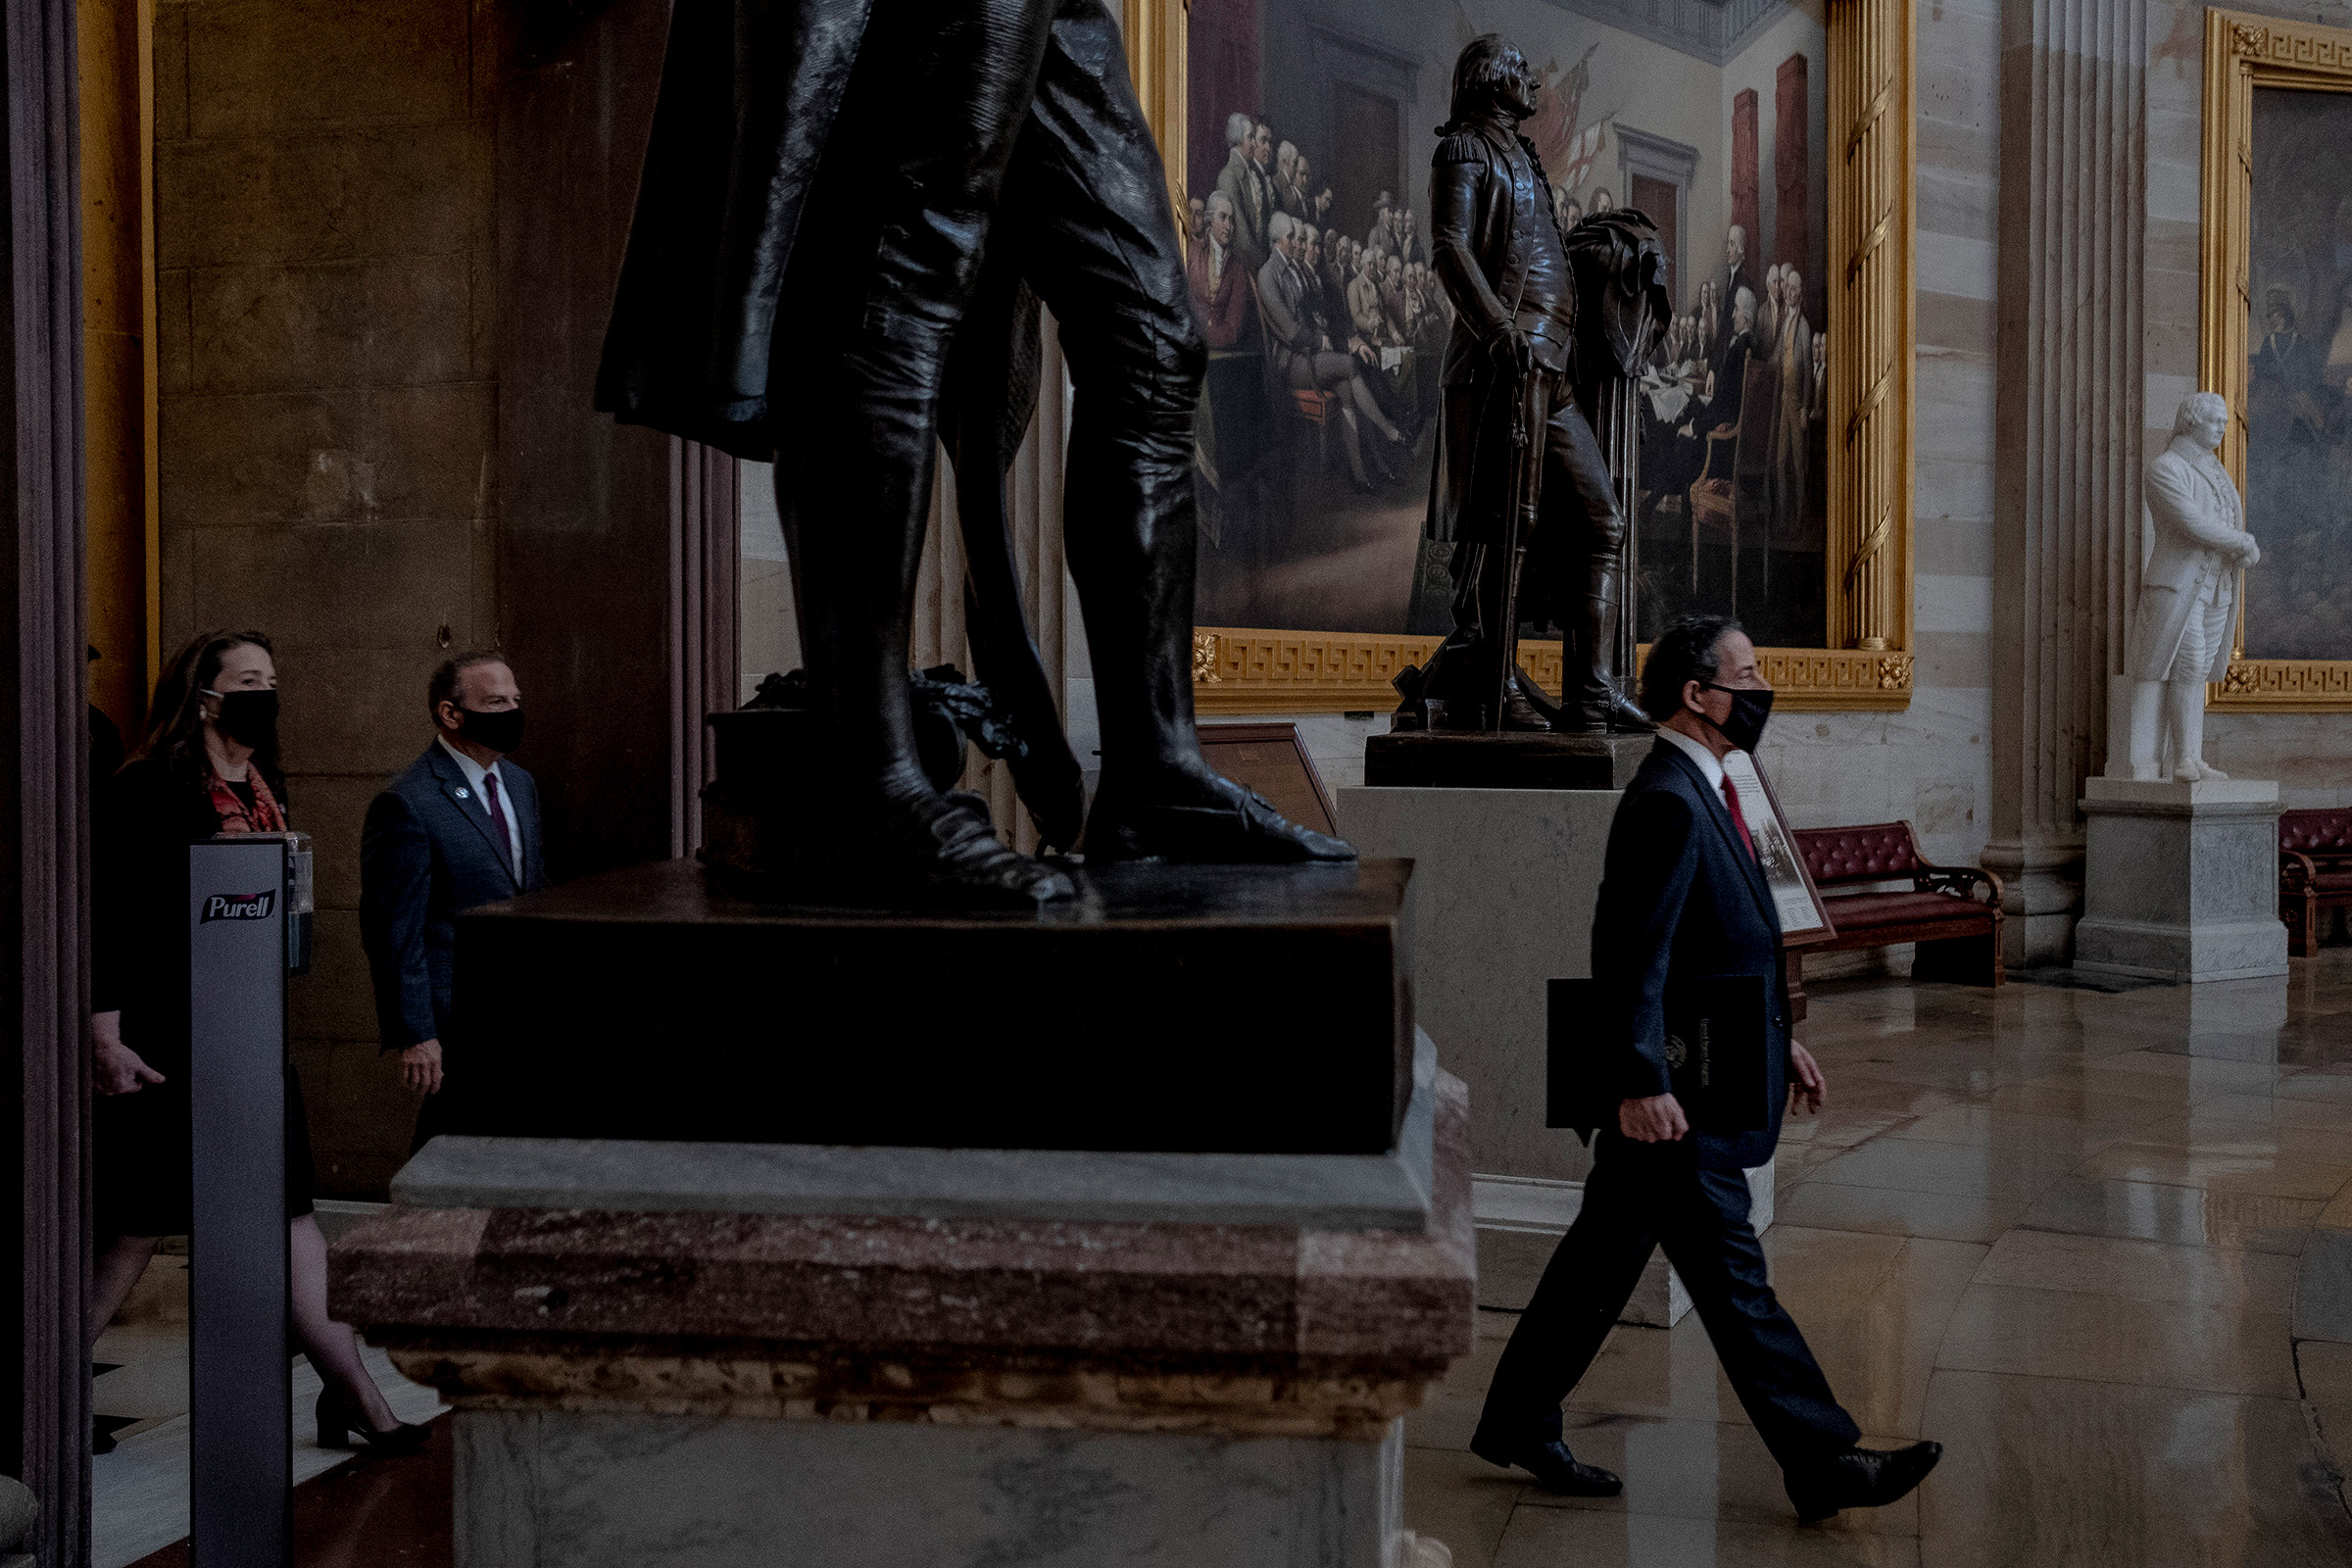 2/9/21, Washington, D.C. House managers walk to the Senate floor for the start of the impeachment trial at the Capitol in Washington, D.C. on Feb. 9, 2021. Gabriella Demczuk / TIME